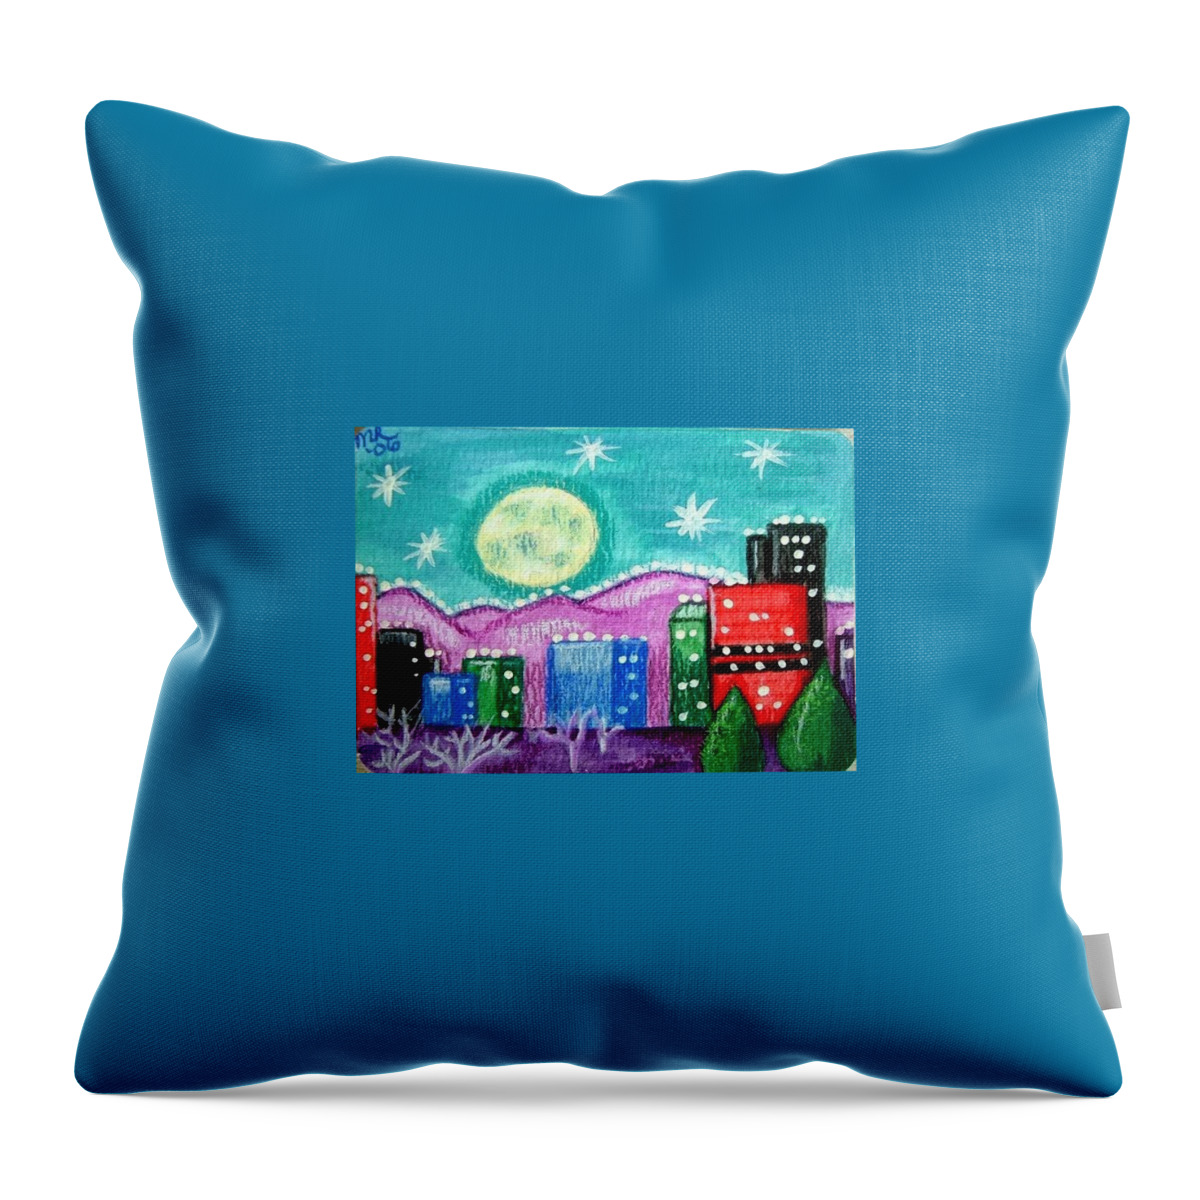 Cityscape Throw Pillow featuring the painting Moonlit Cityscape by Monica Resinger